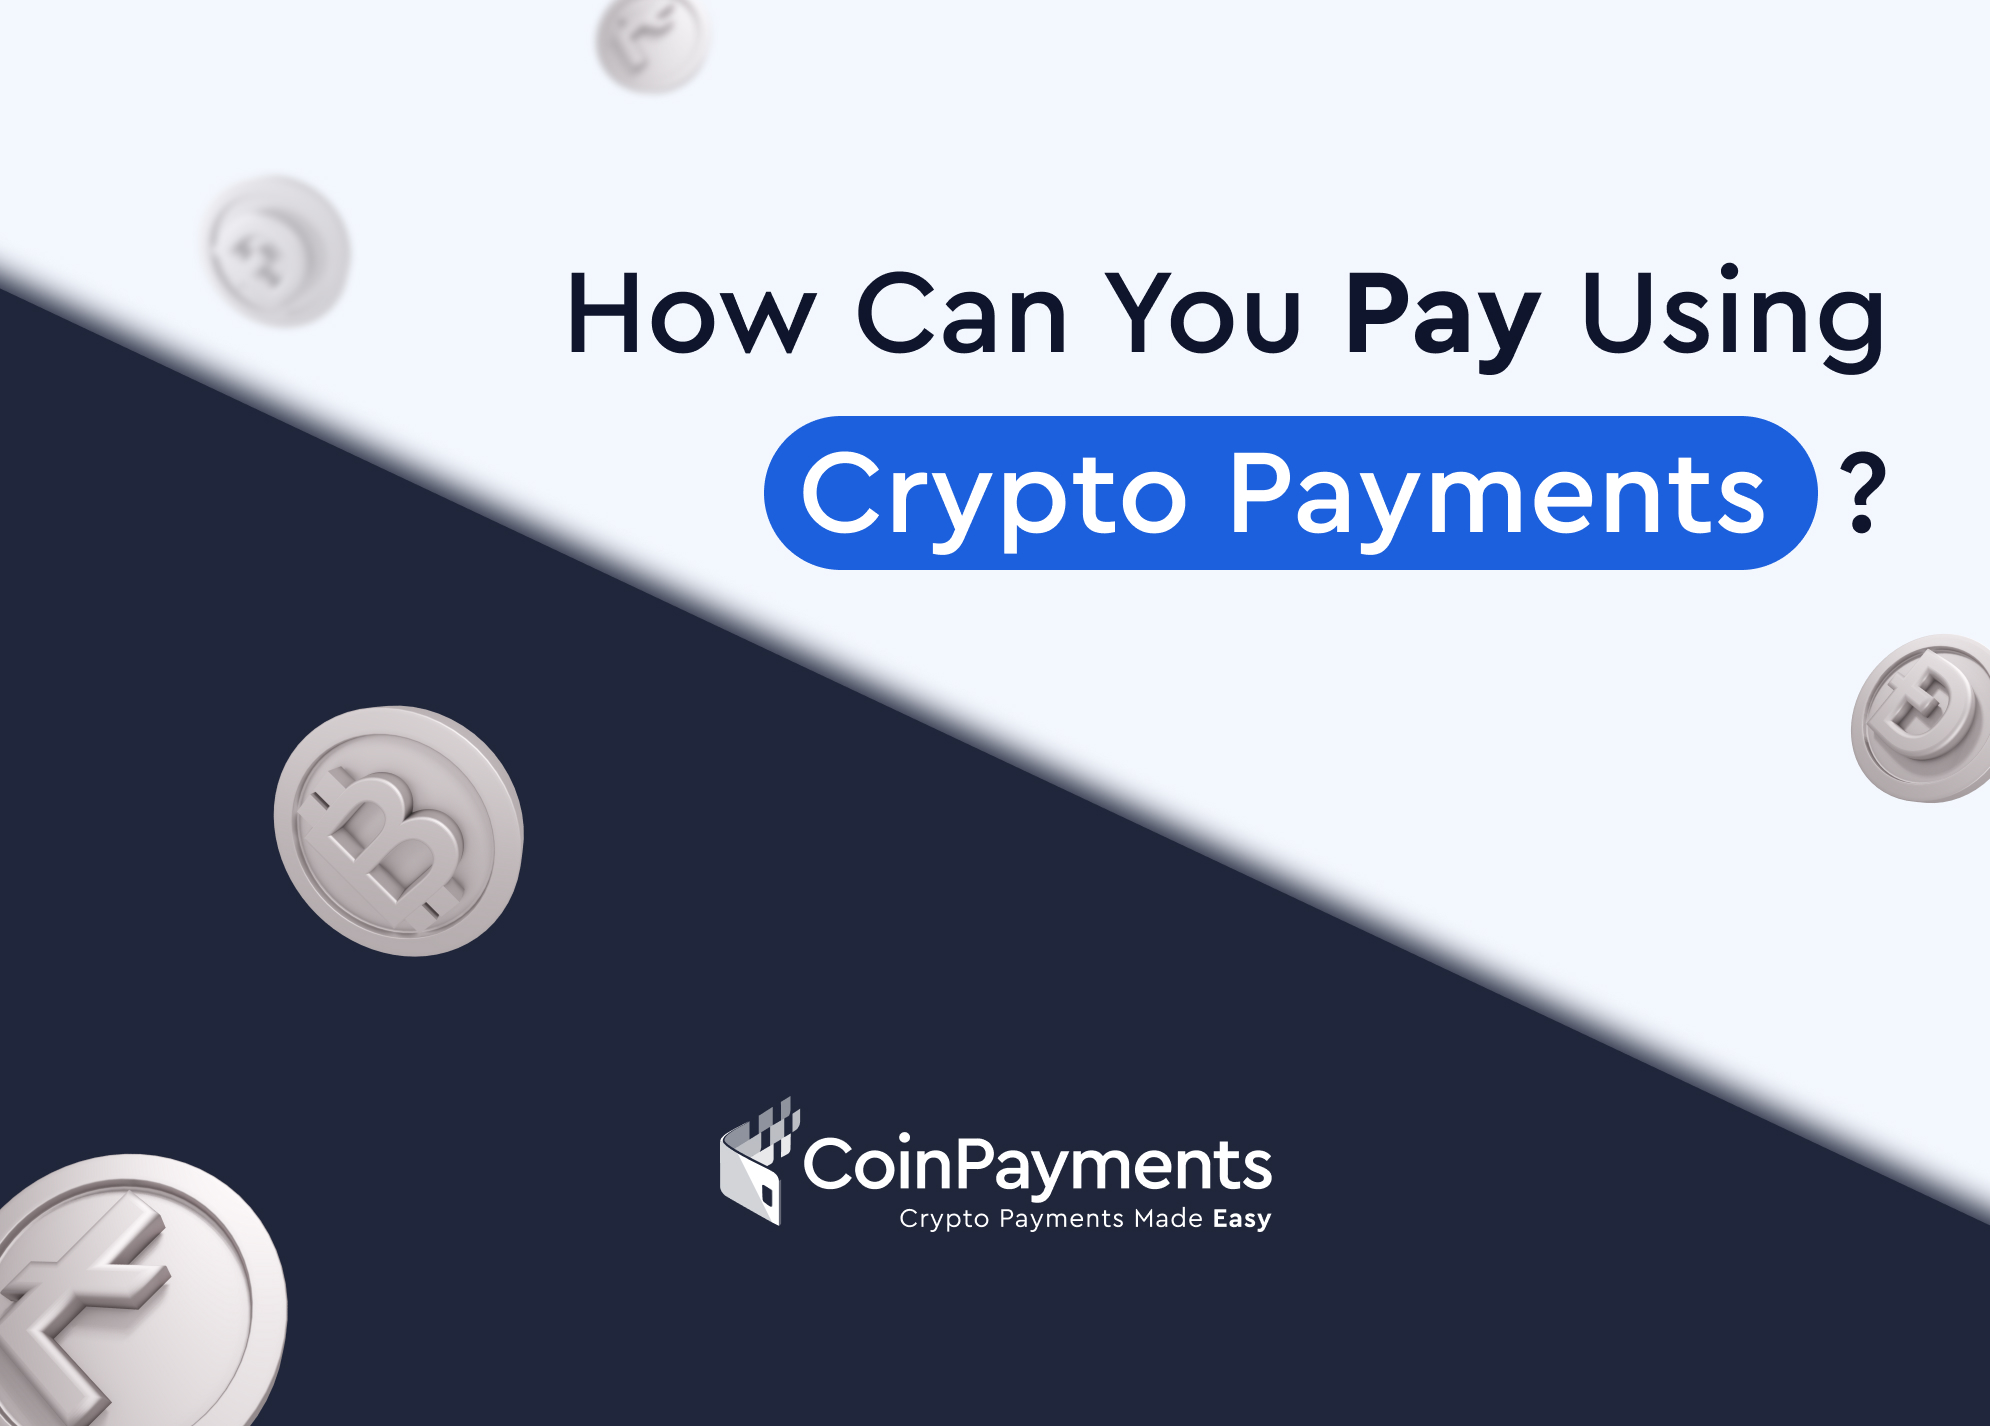 How Can You Pay Using Crypto Payments? - CoinPayments Blog